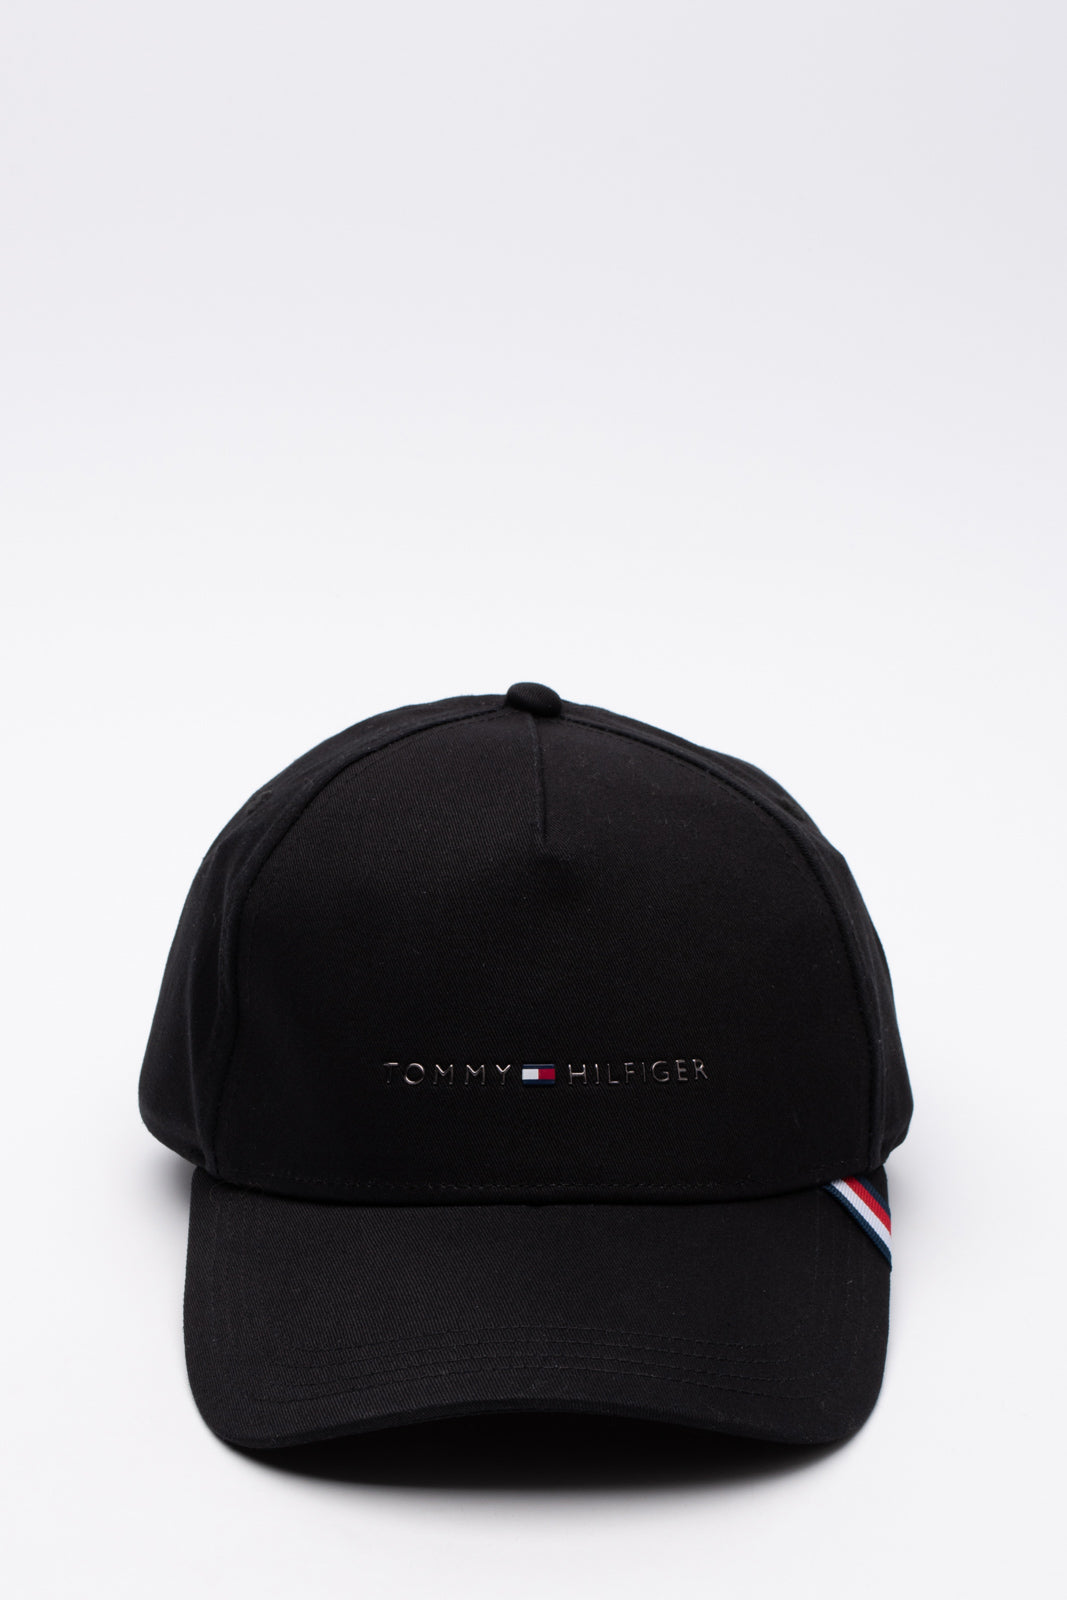 TOMMY HILFIGER Baseball Cap One Size Adjustable Striped Strap Metal Logo gallery main photo